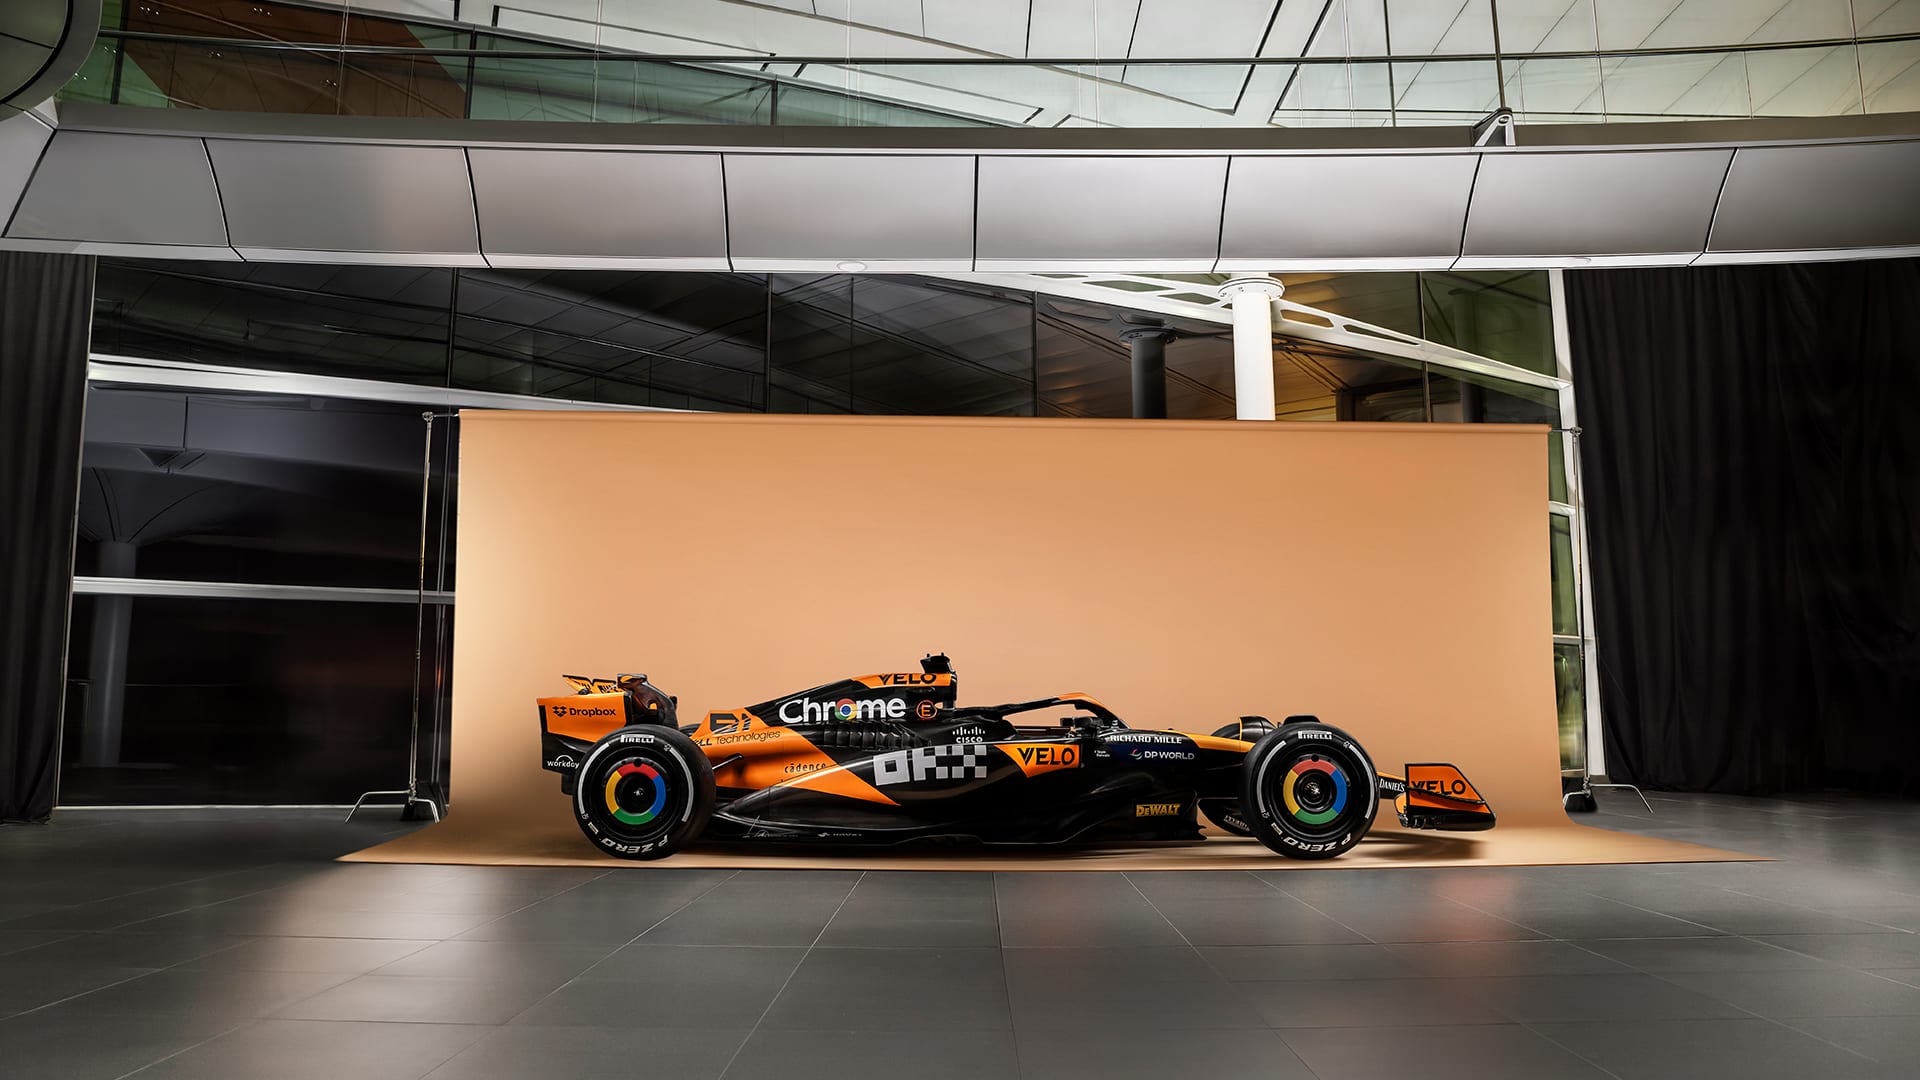 FIRST LOOK: McLaren present new F1 car ahead of Silverstone shakedown